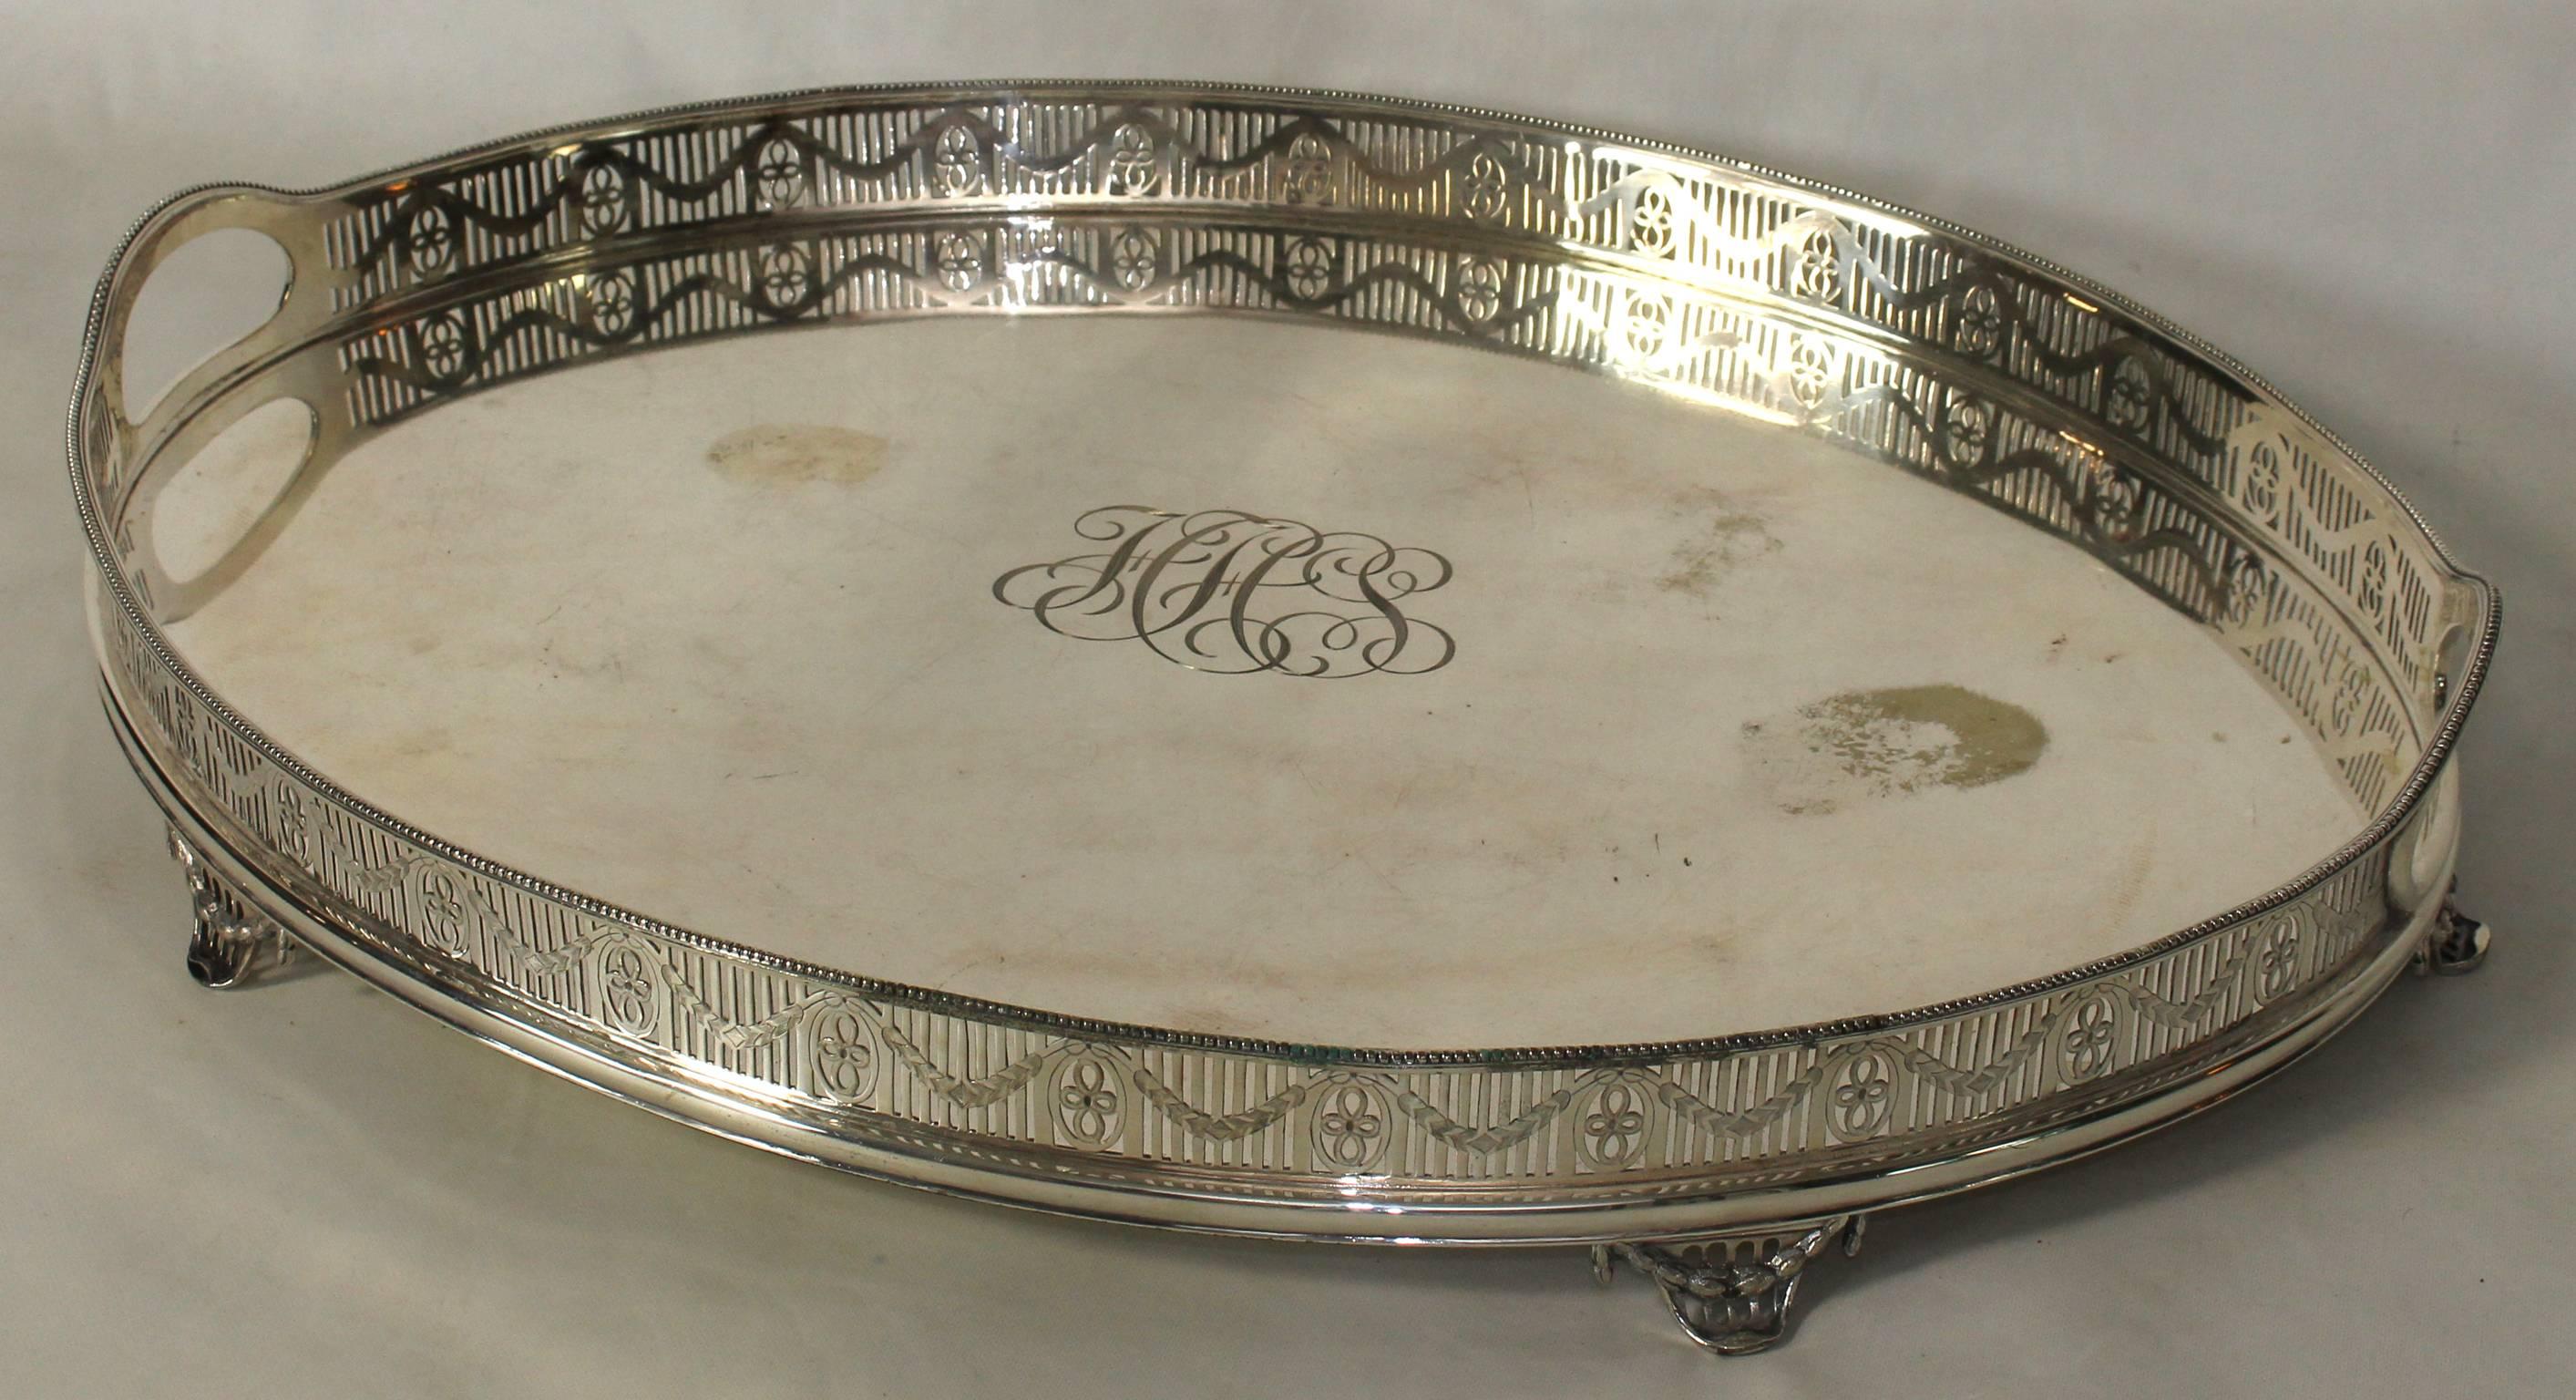 A large oval English Sheffield silver gallery tray with elaborate monogram engraved in the center.